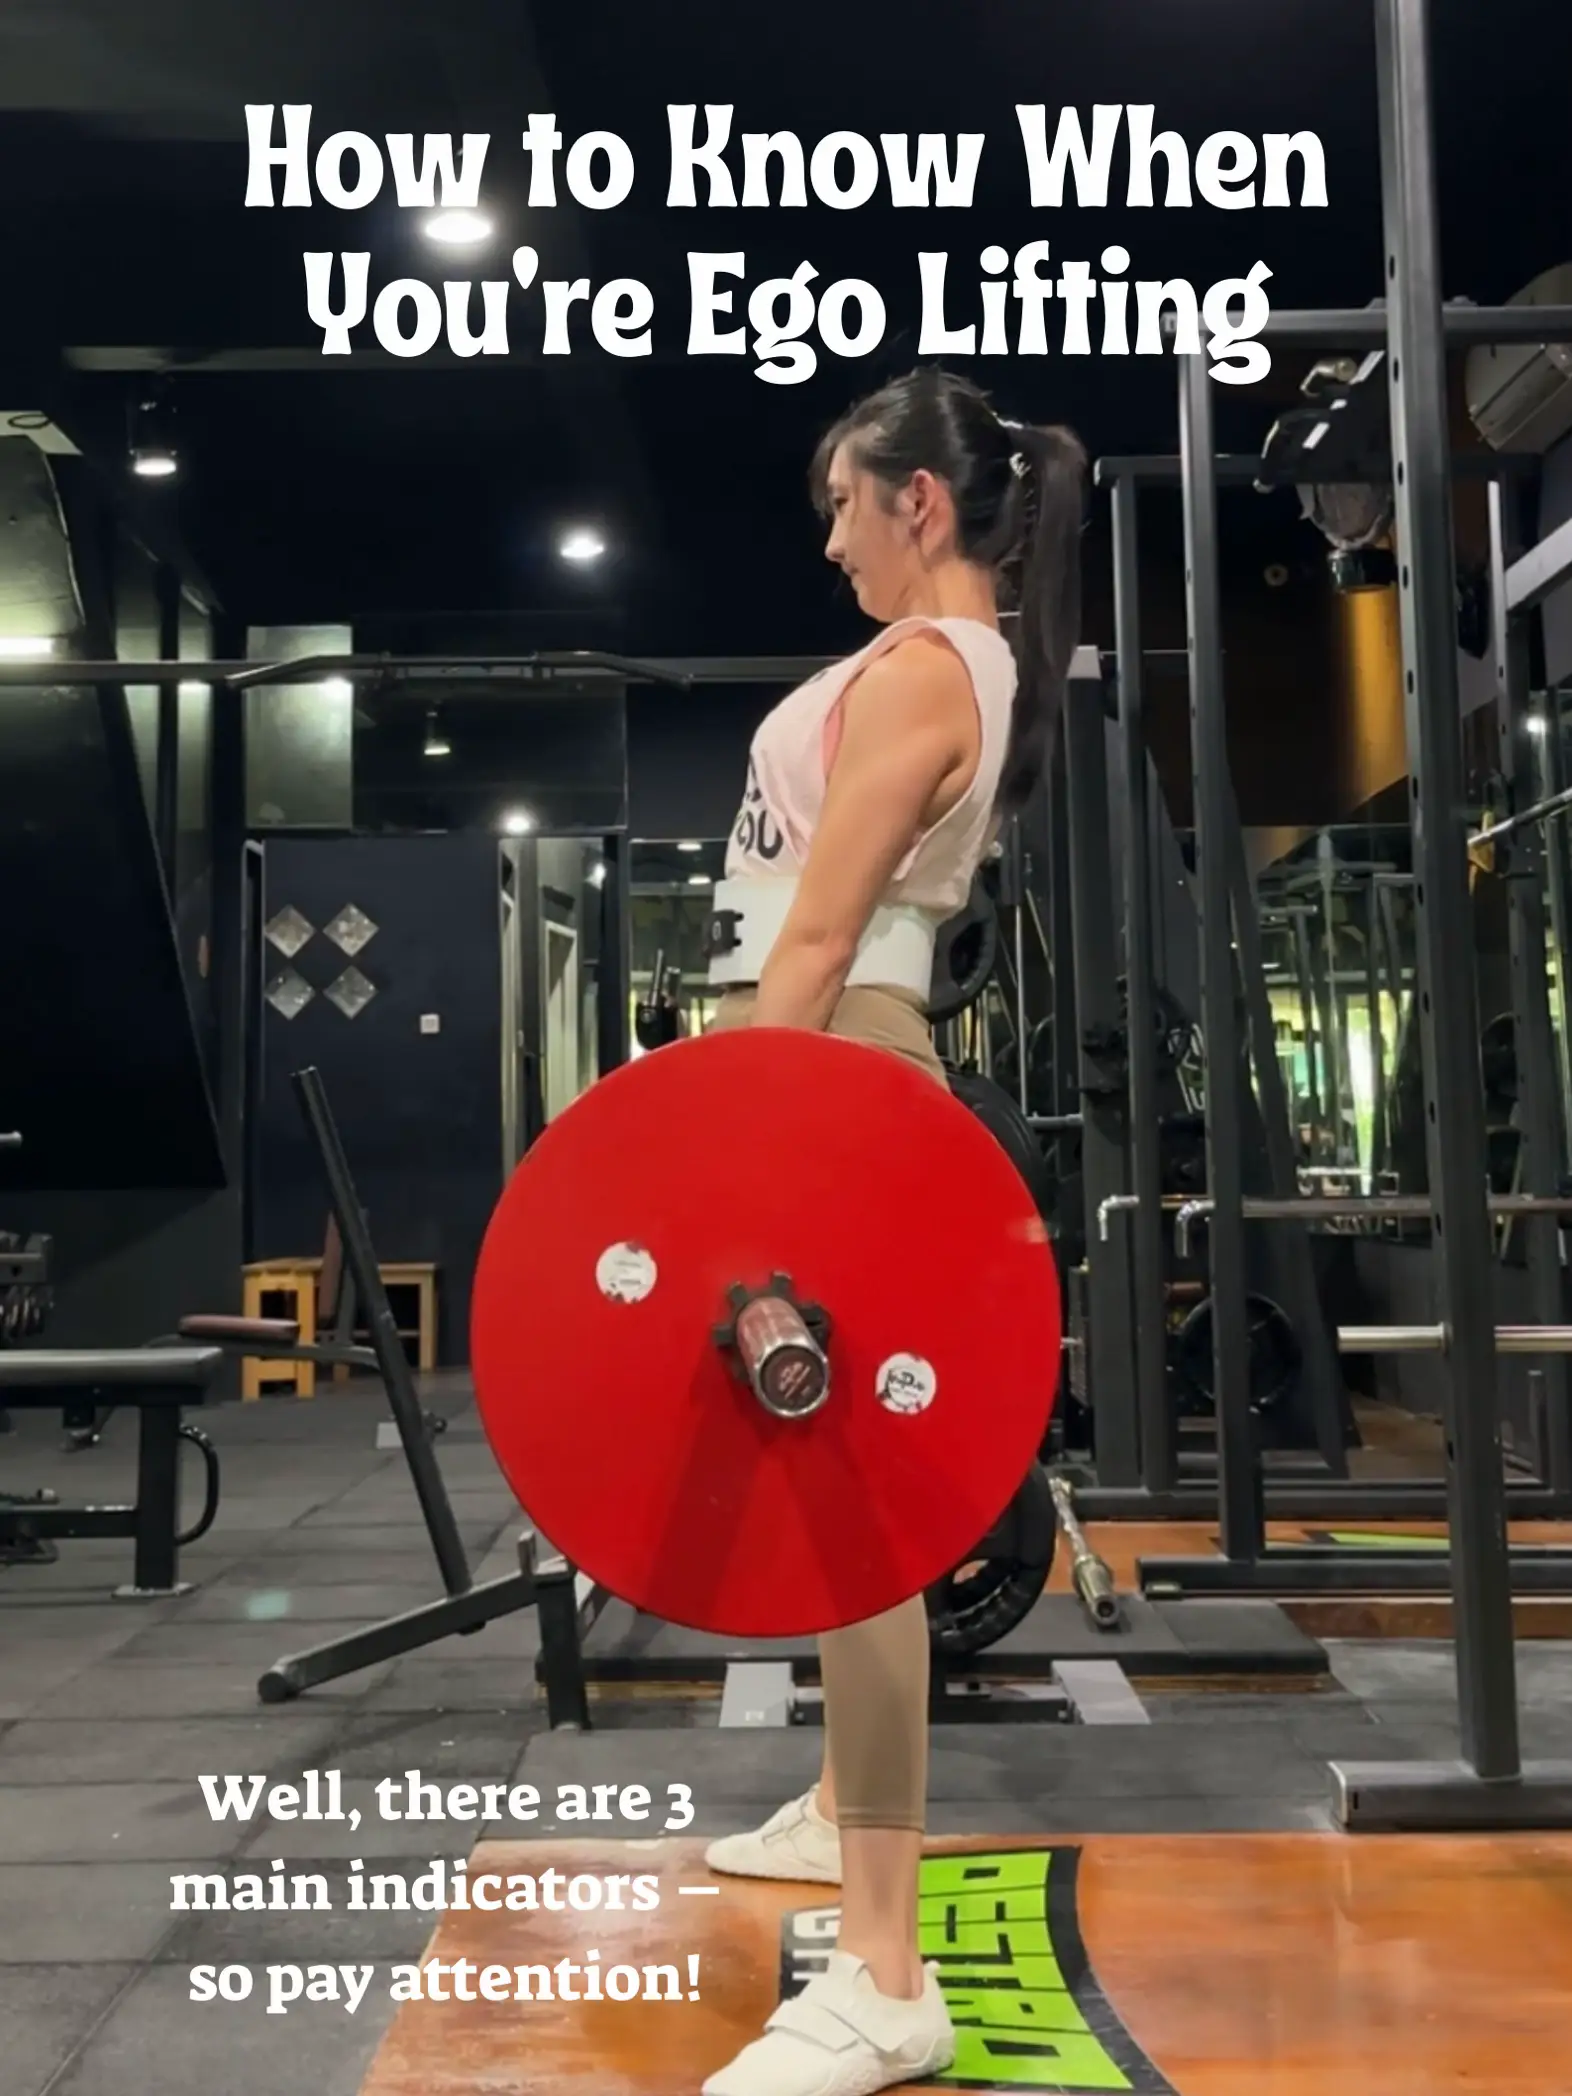 How To Tell If You're Ego Lifting